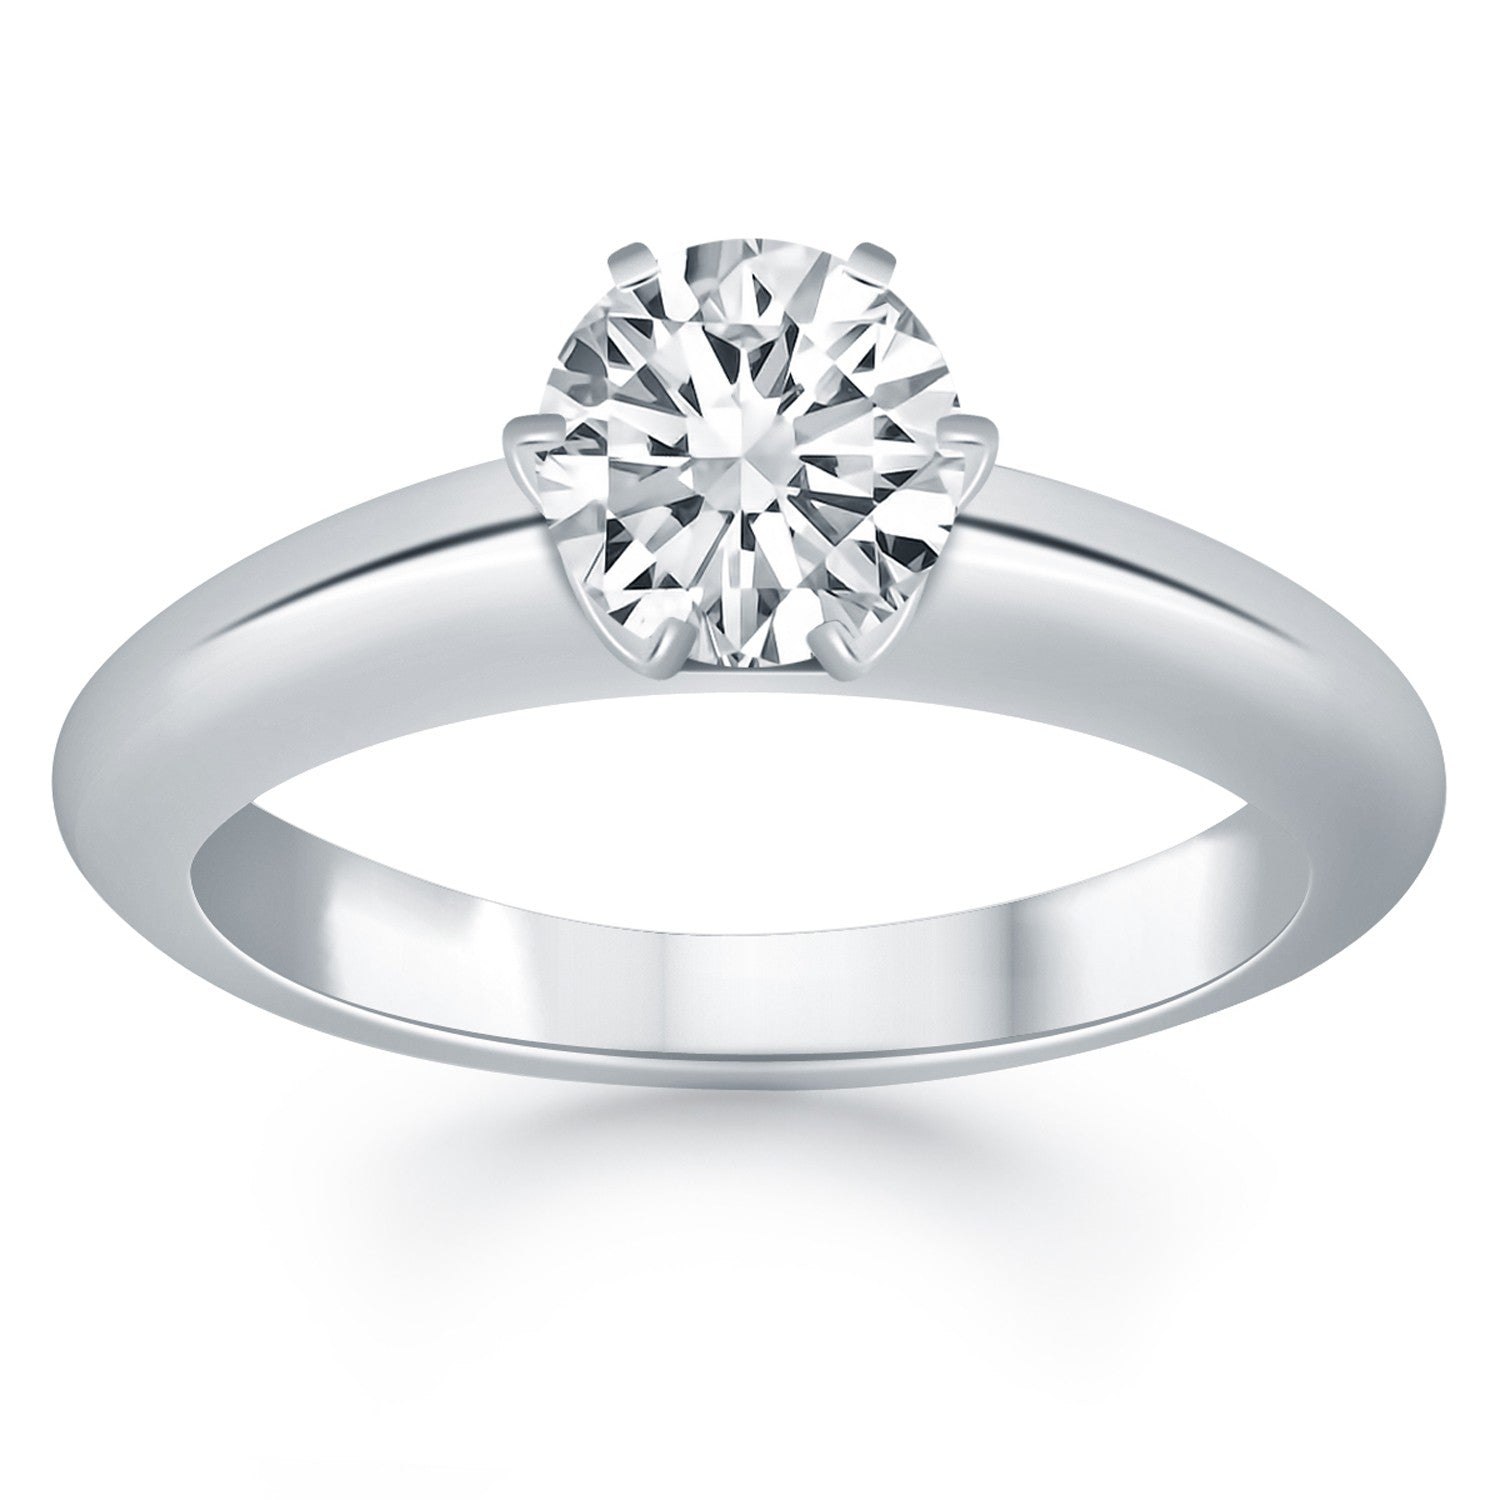 14k White Gold Solitaire Cathedral Engagement Ring freeshipping - Higher Class Elegance